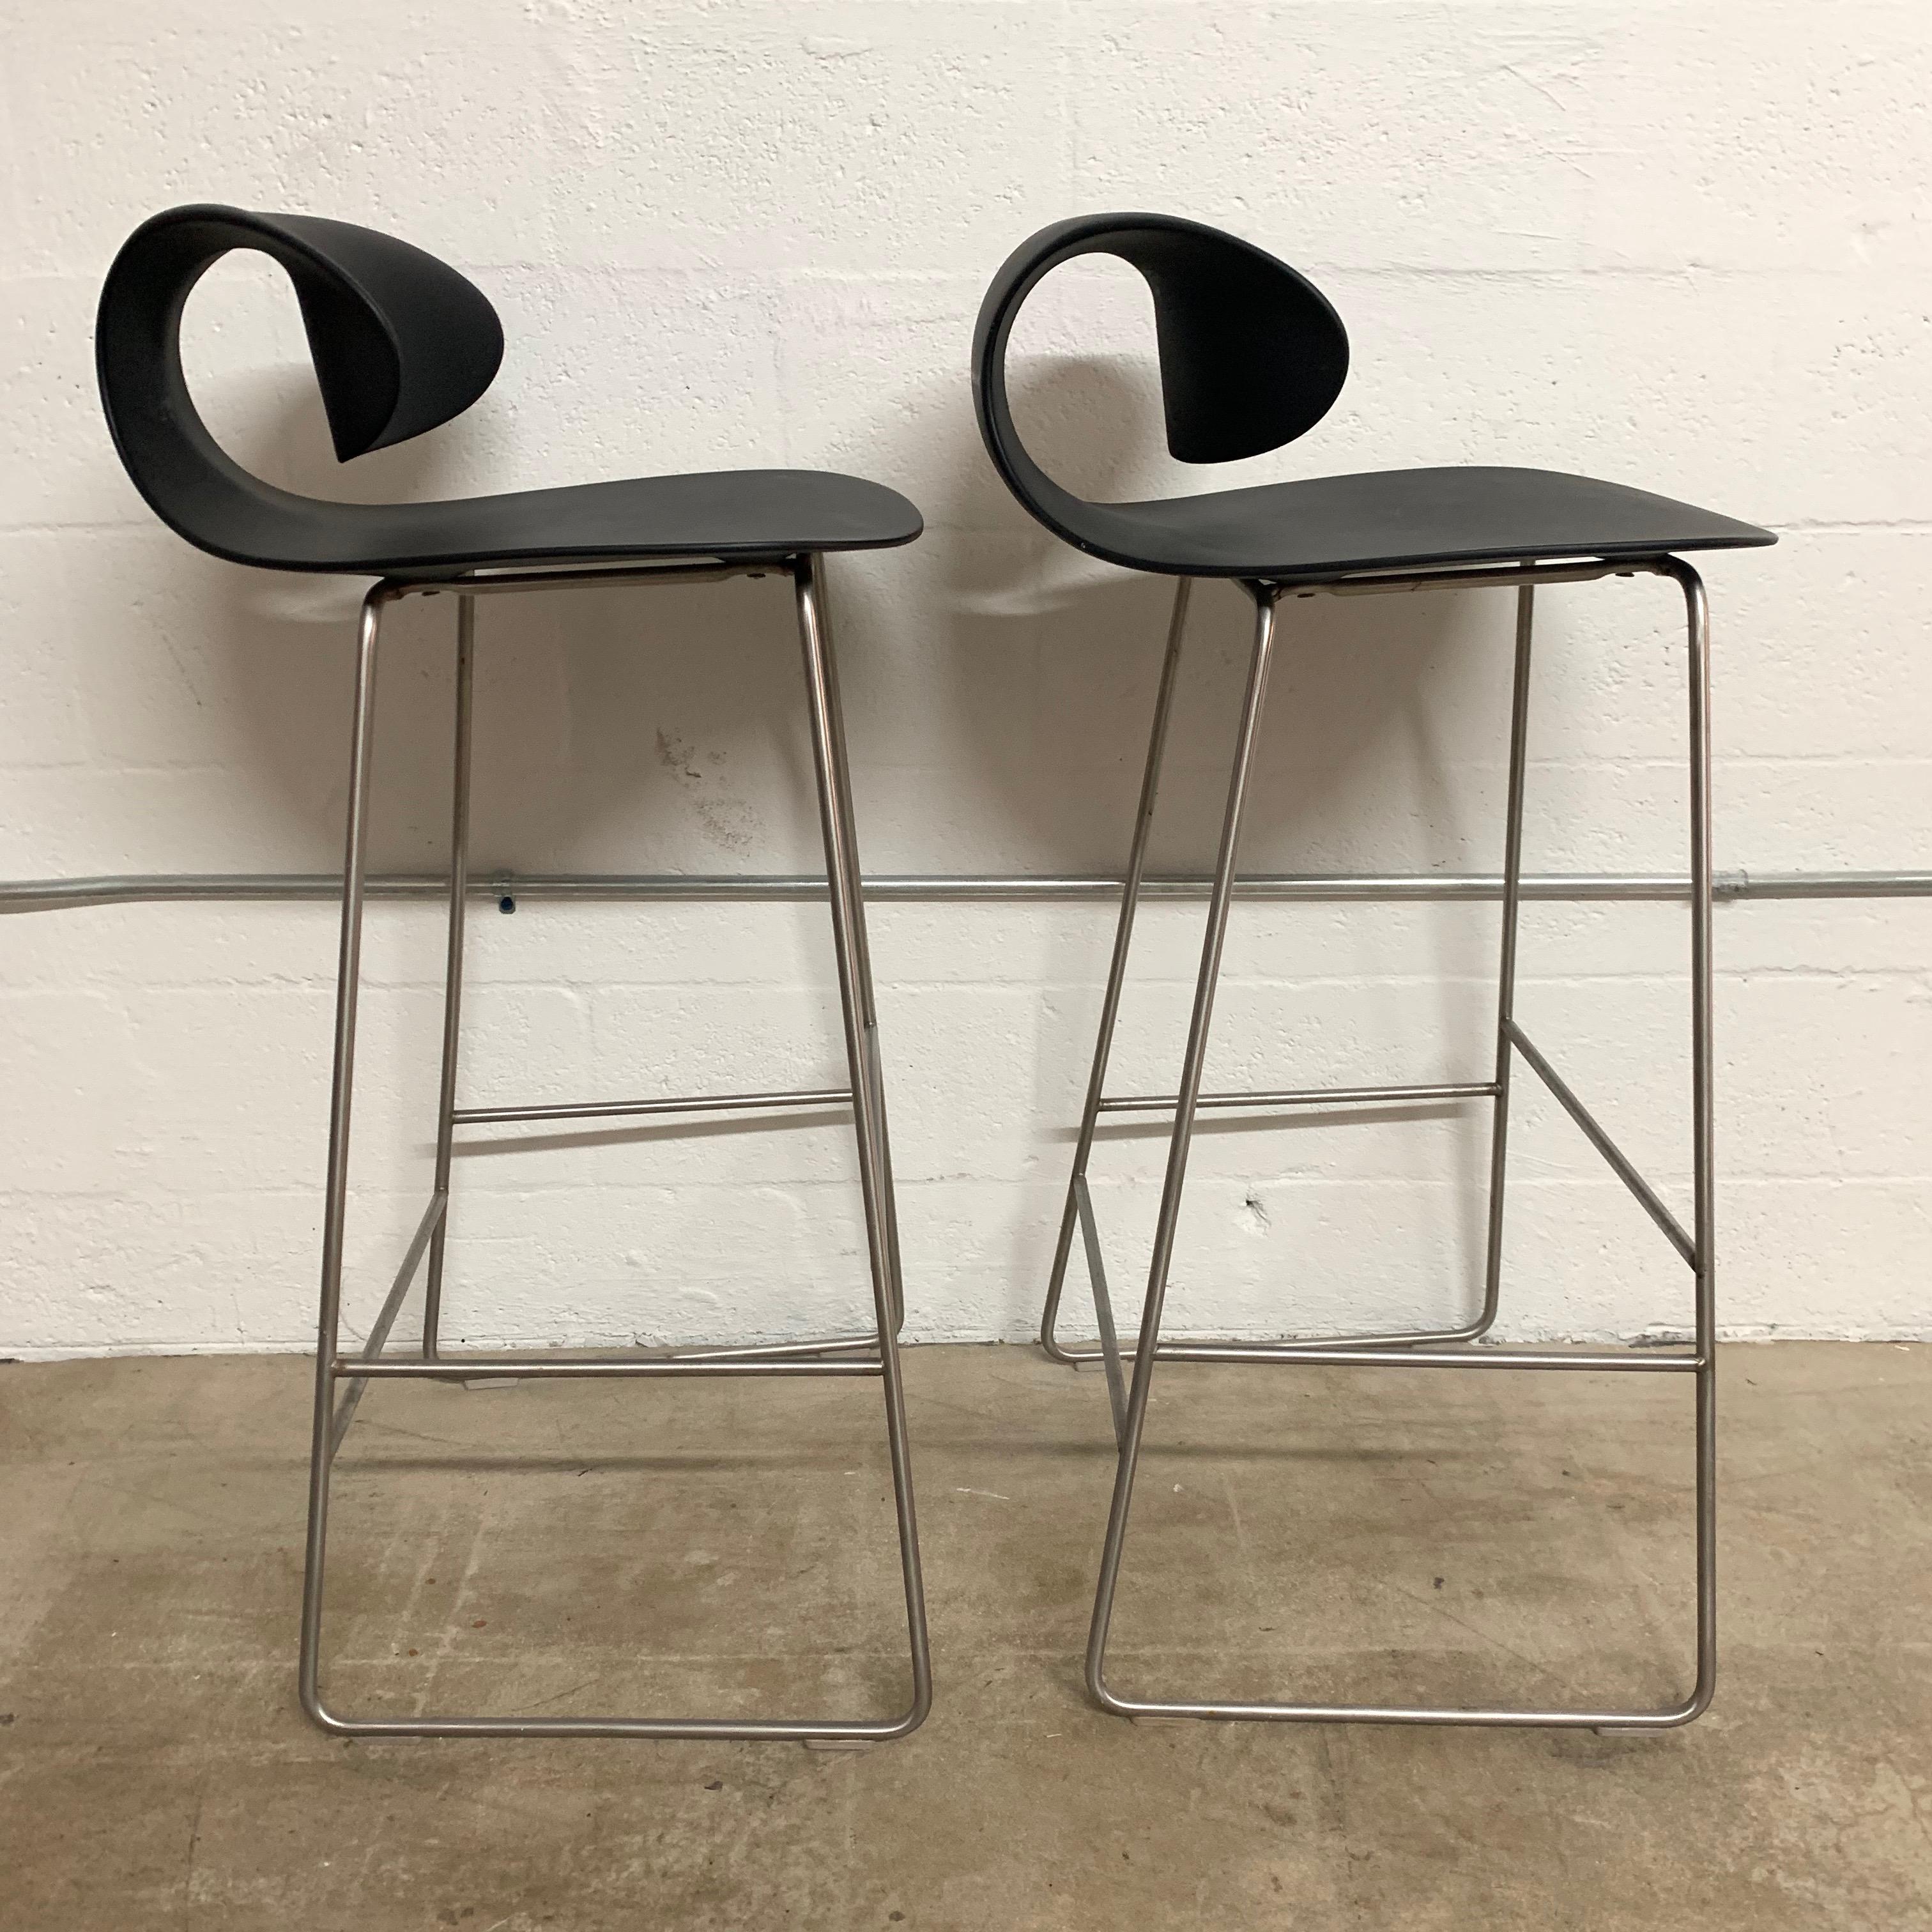 Sculptural pair of barstools rendered in molded polycarbonate with a steel frame and footrest designed and manufactured by Sawaya & Moroni.